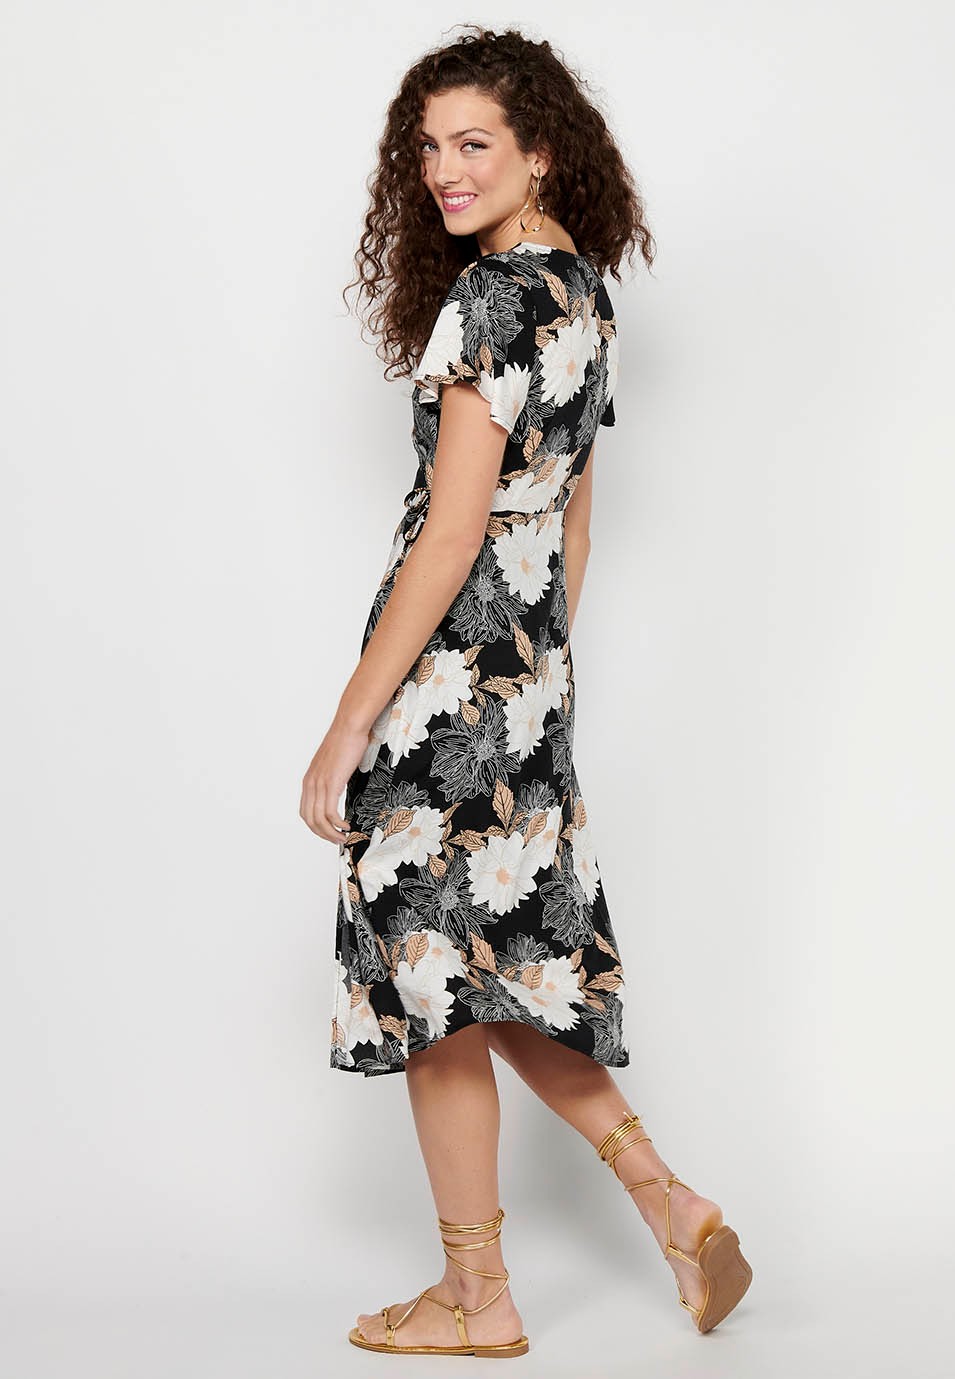 Short-sleeved dress with crossed V-neck and floral print in Black for Women 5